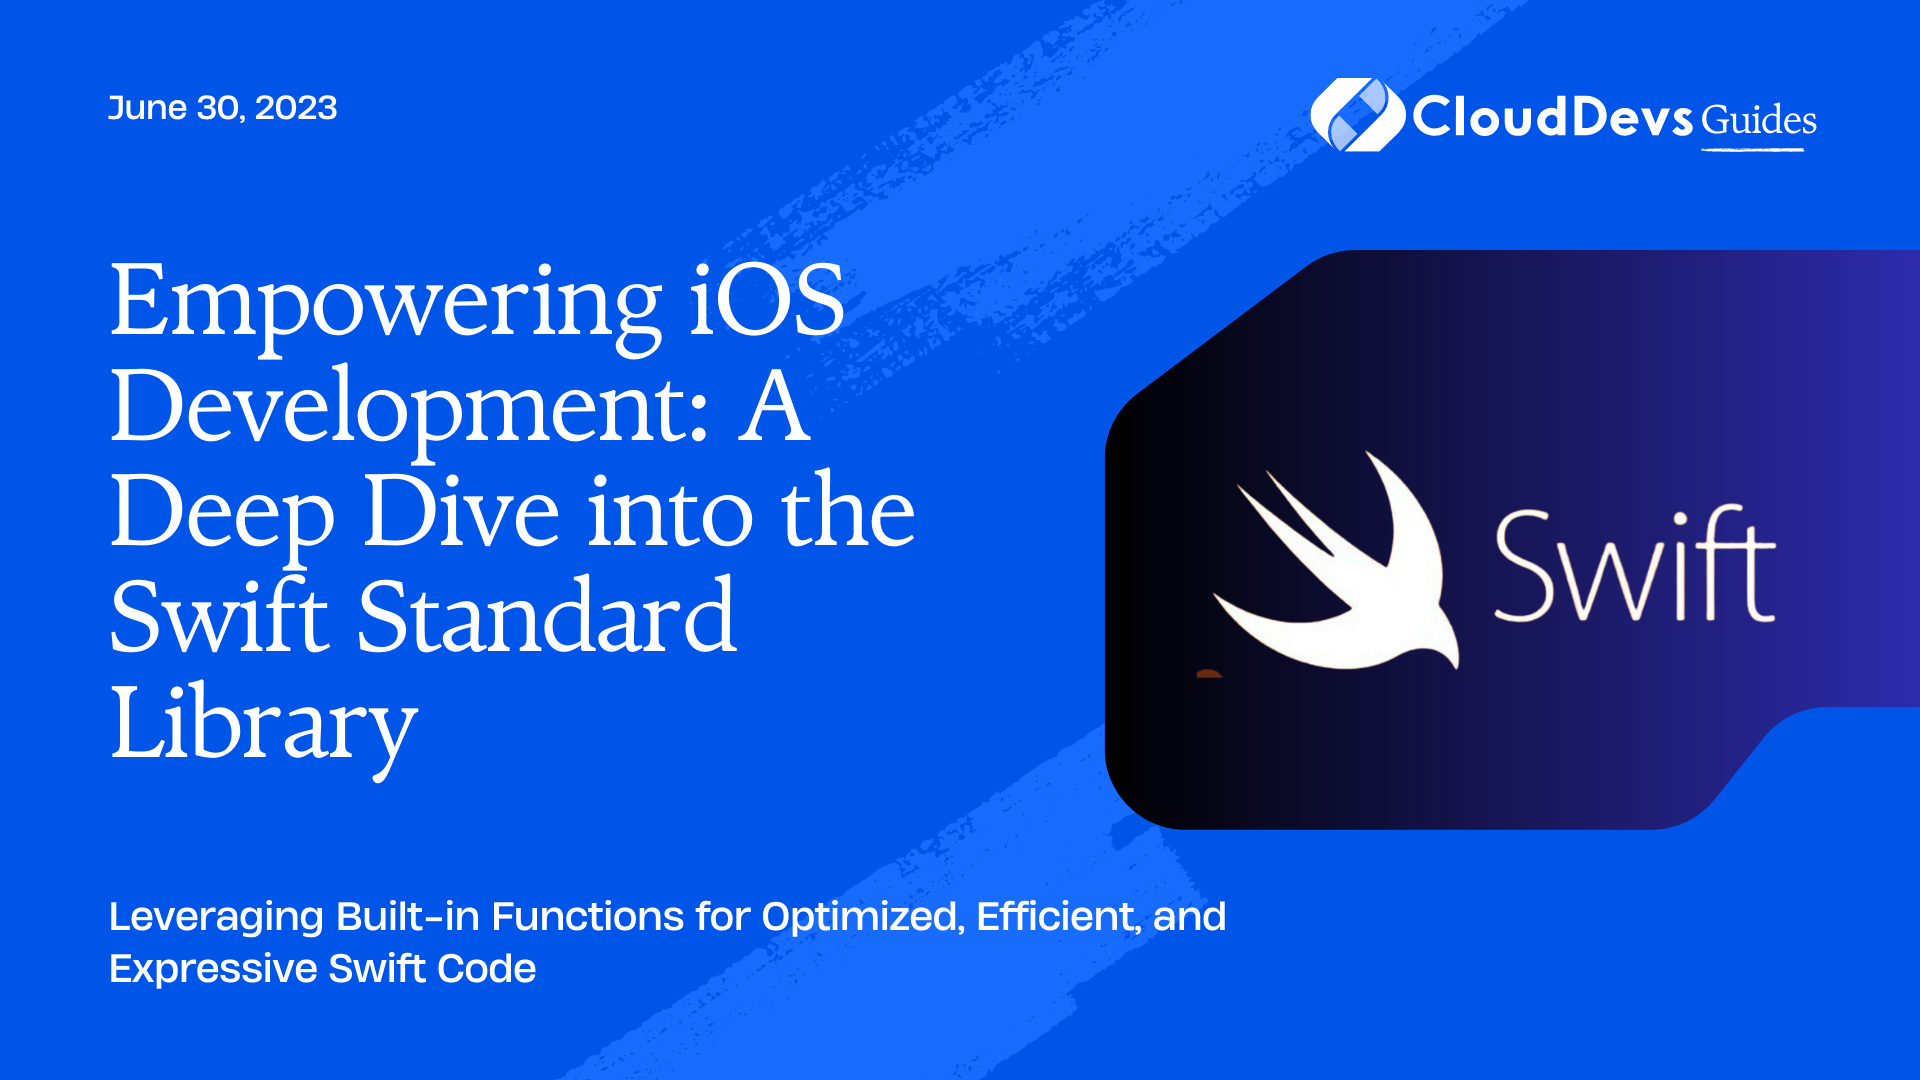 Empowering iOS Development: A Deep Dive into the Swift Standard Library